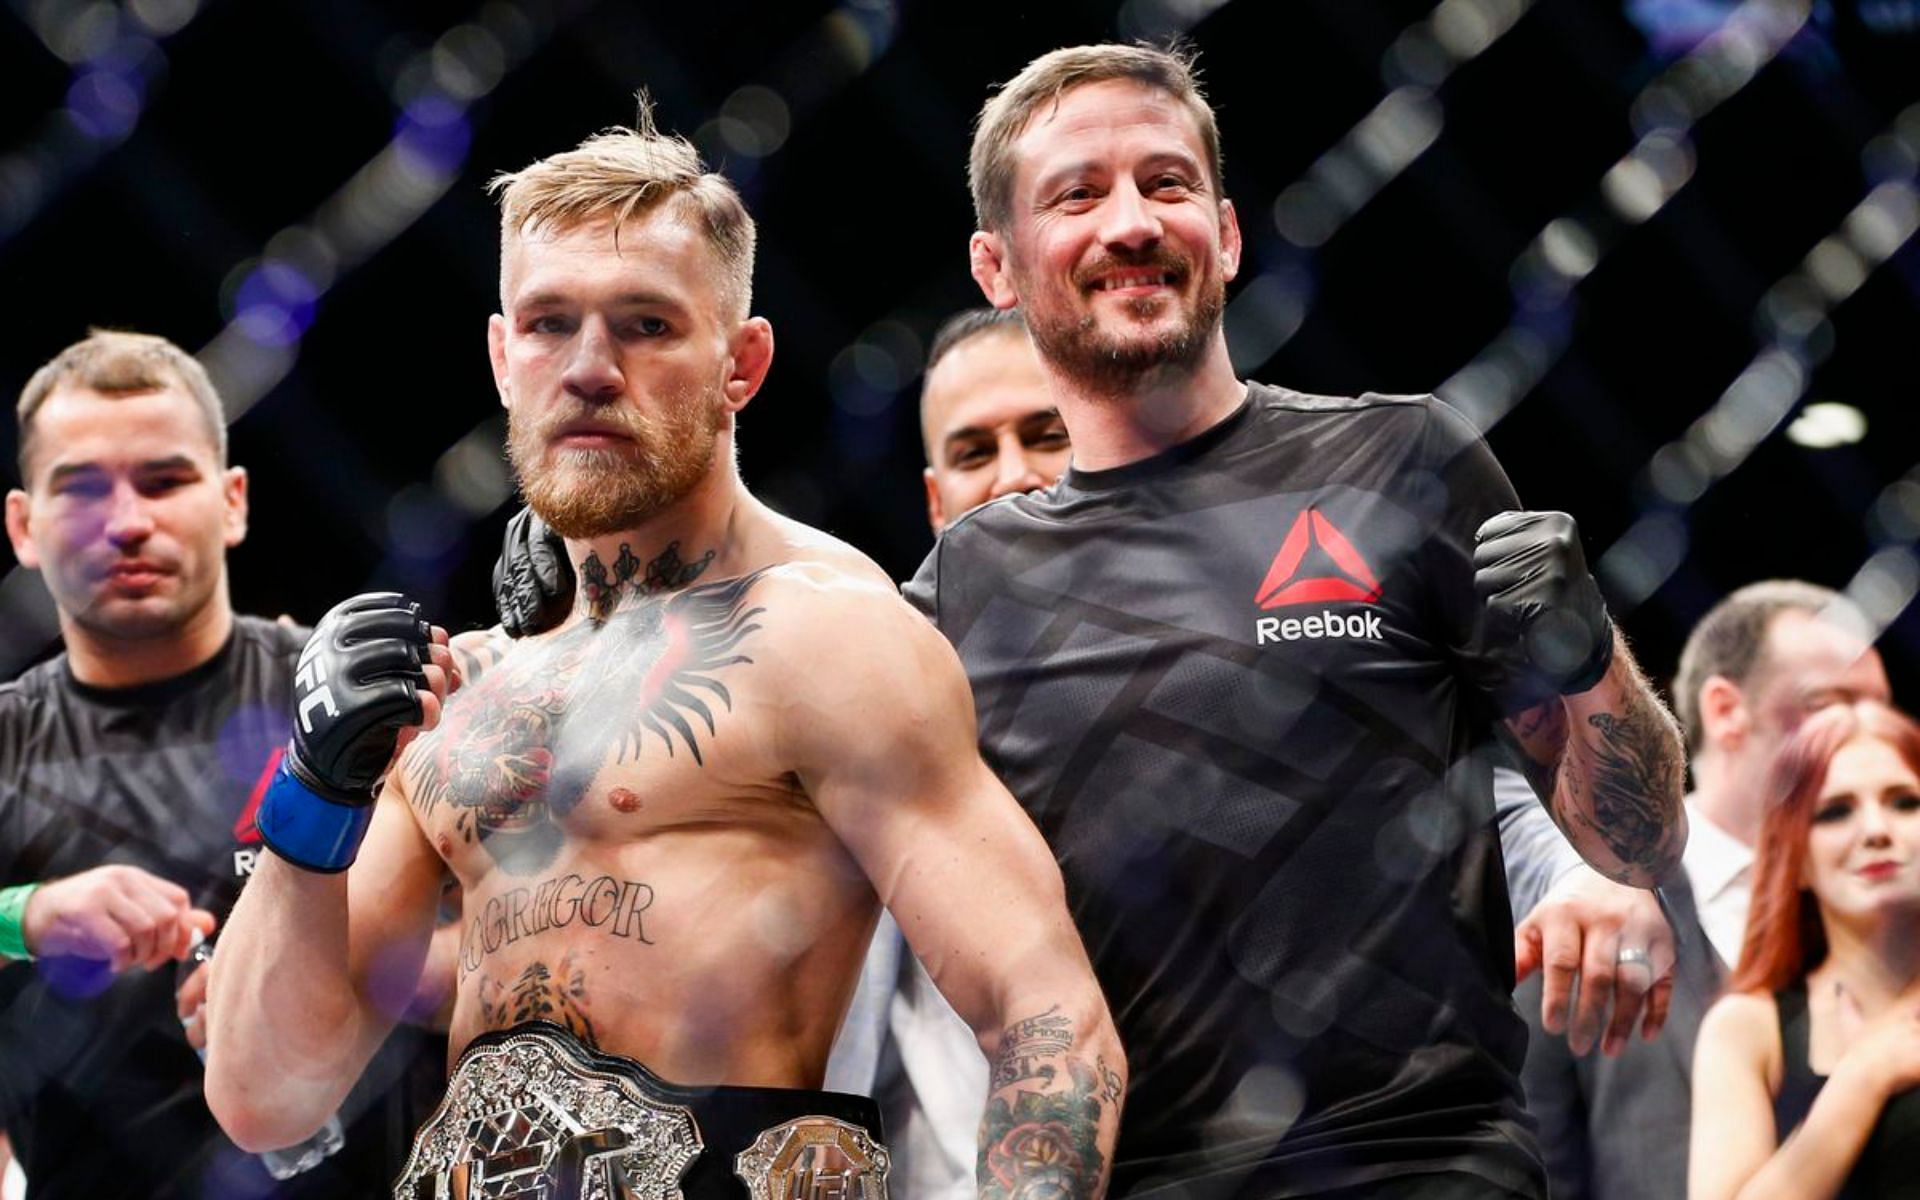 Conor McGregor (left) and John Kavanagh (right). [via Getty Images]